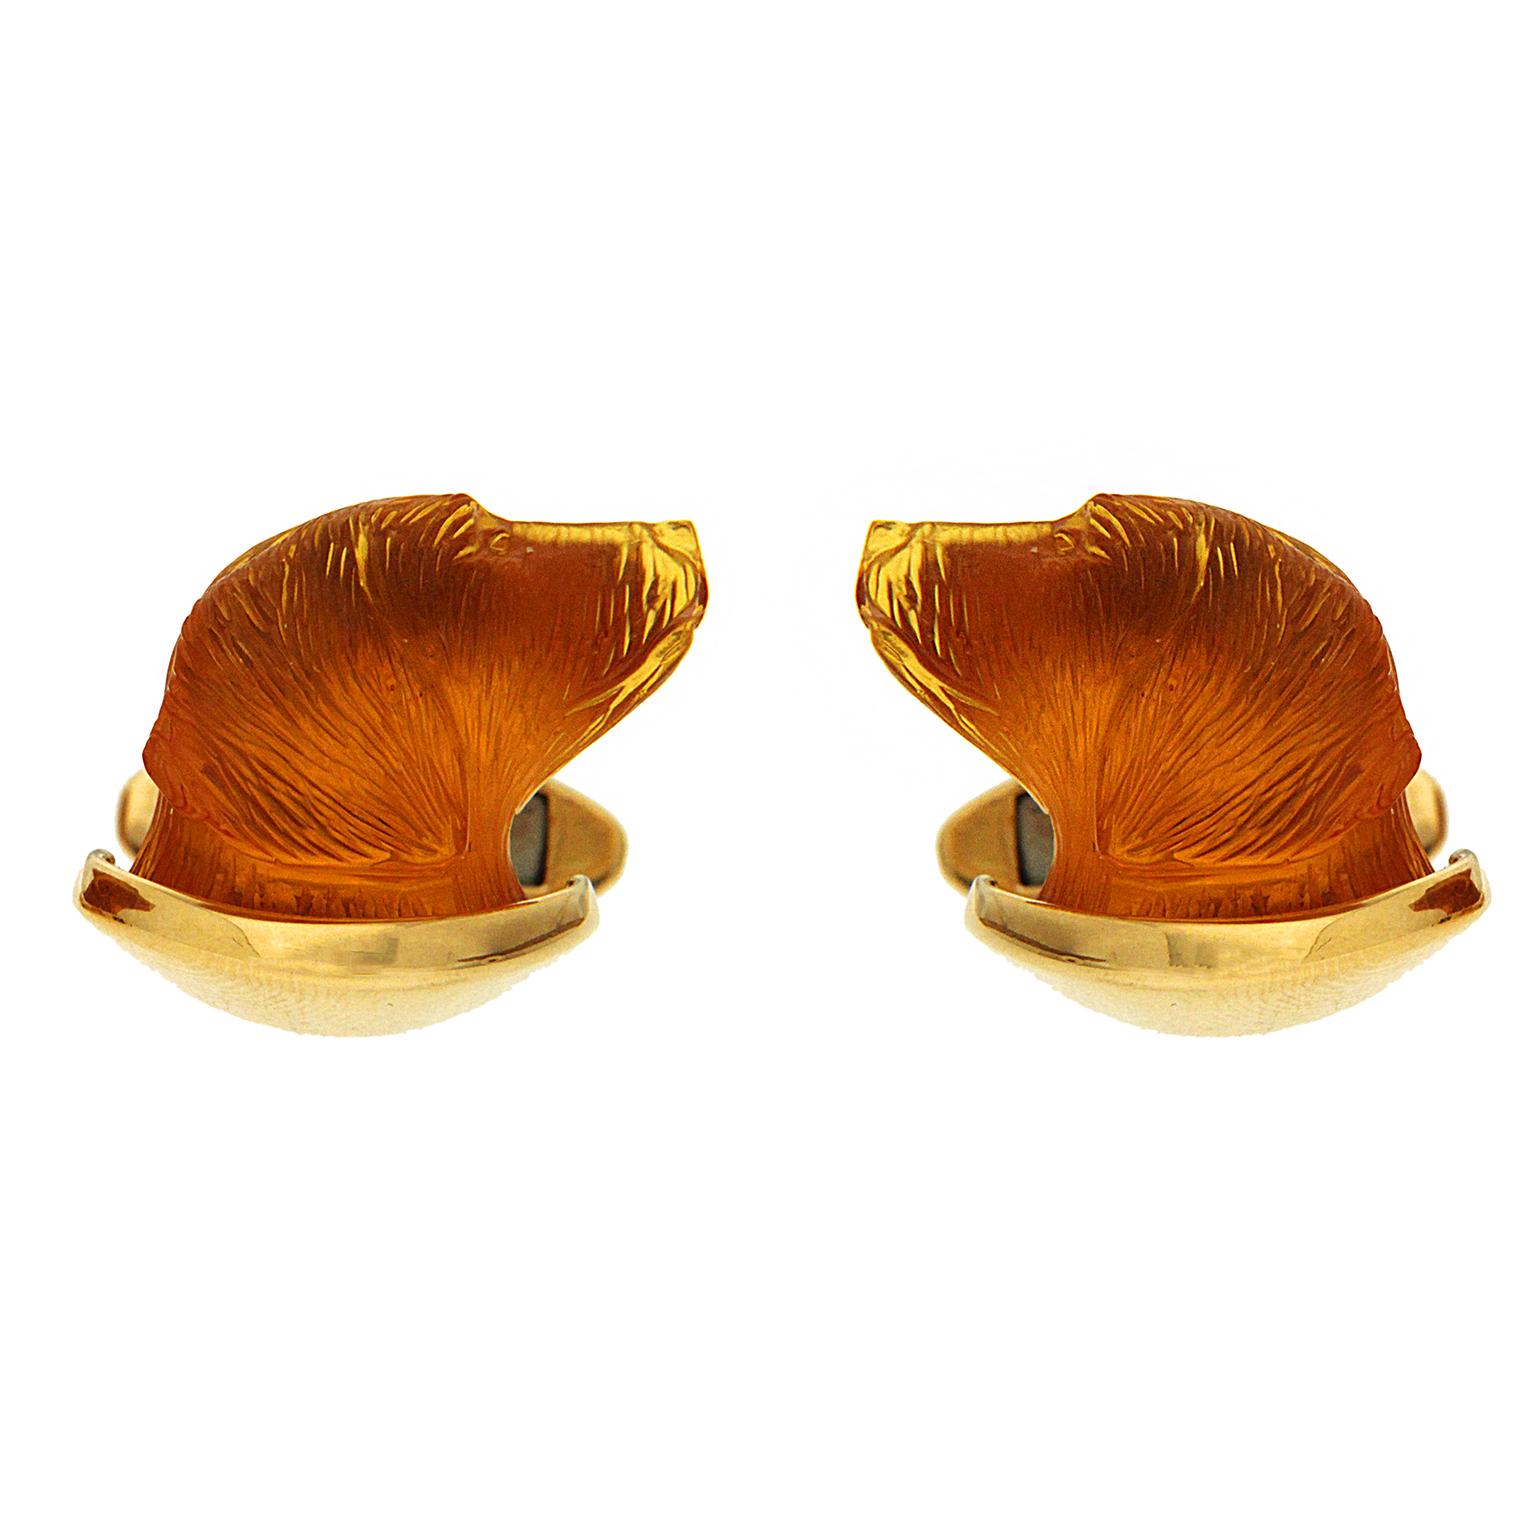 Carved amber forms the heads of Labradors and 18k yellow gold collars. The crystalline gemstone allows the light to reflect on the detailing of the fur and eyes. Toggles on the back secure the shirt to the cufflinks, which measure 0.77 inches